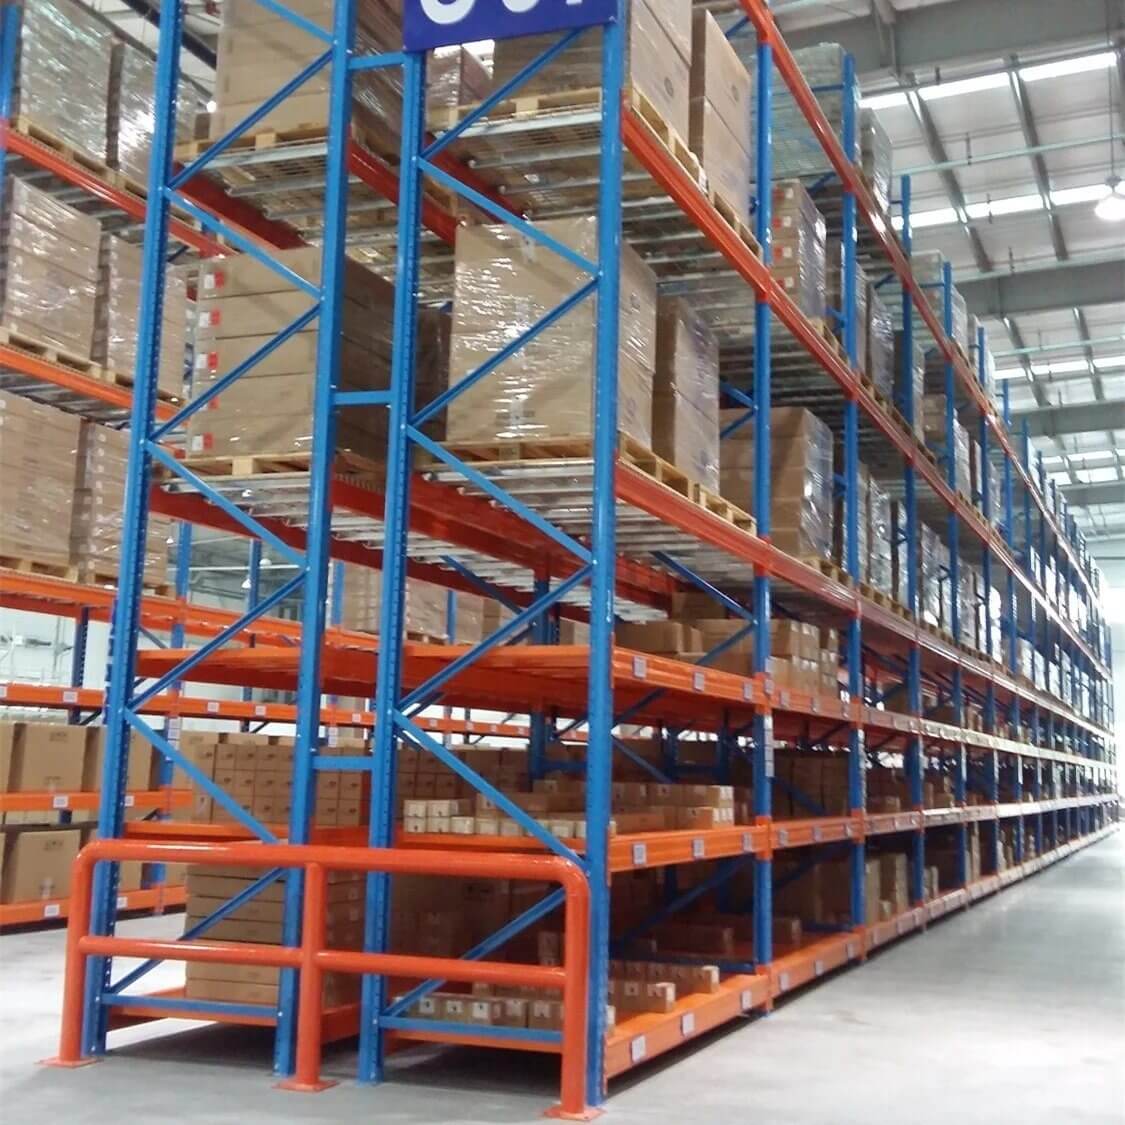 Pallet Racking Systems Manufacturers in Noida